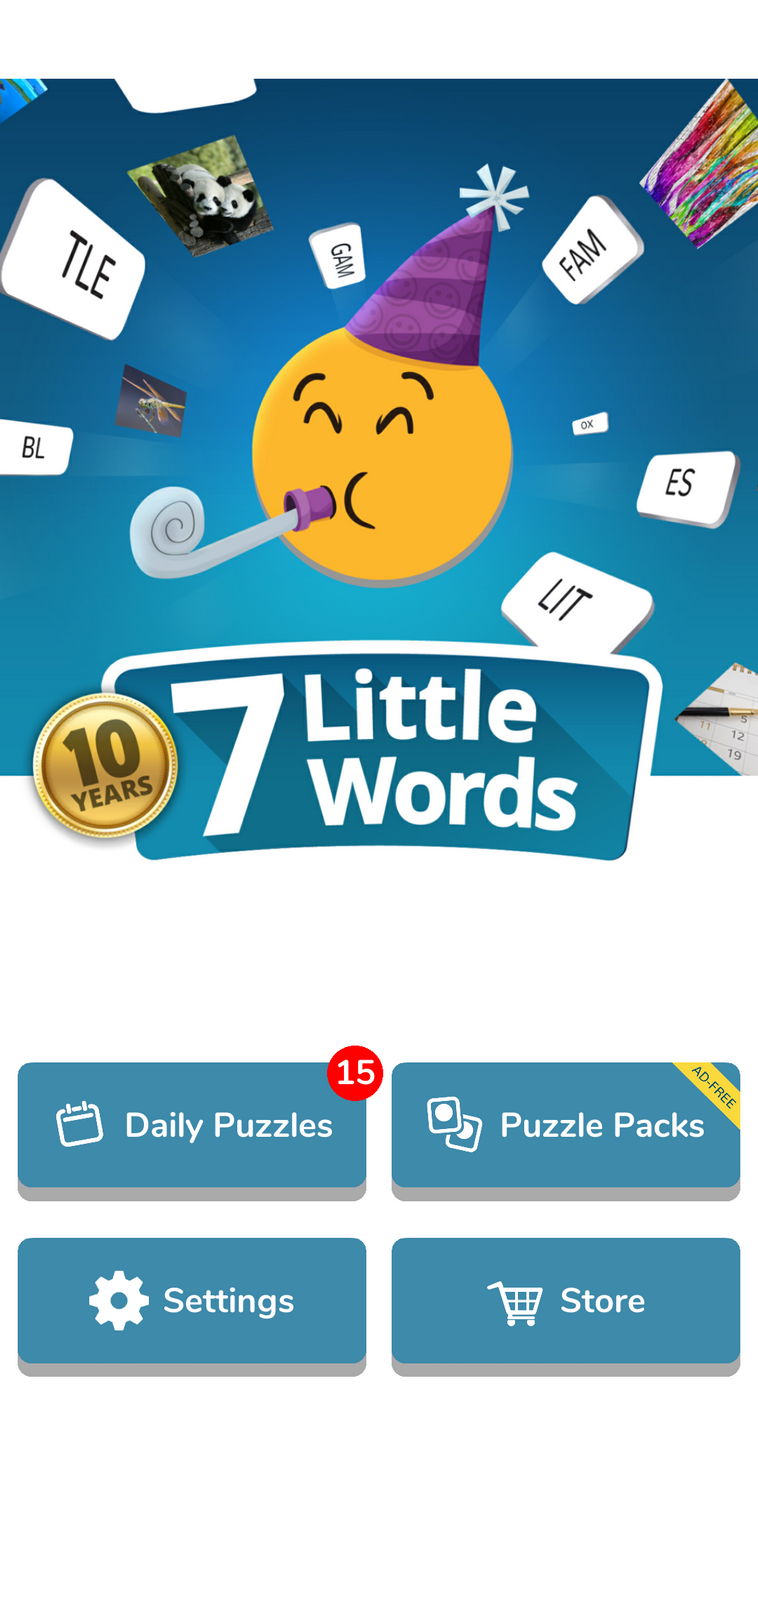 7 Little Words A fun twist on crossword puzzles Android Game APK